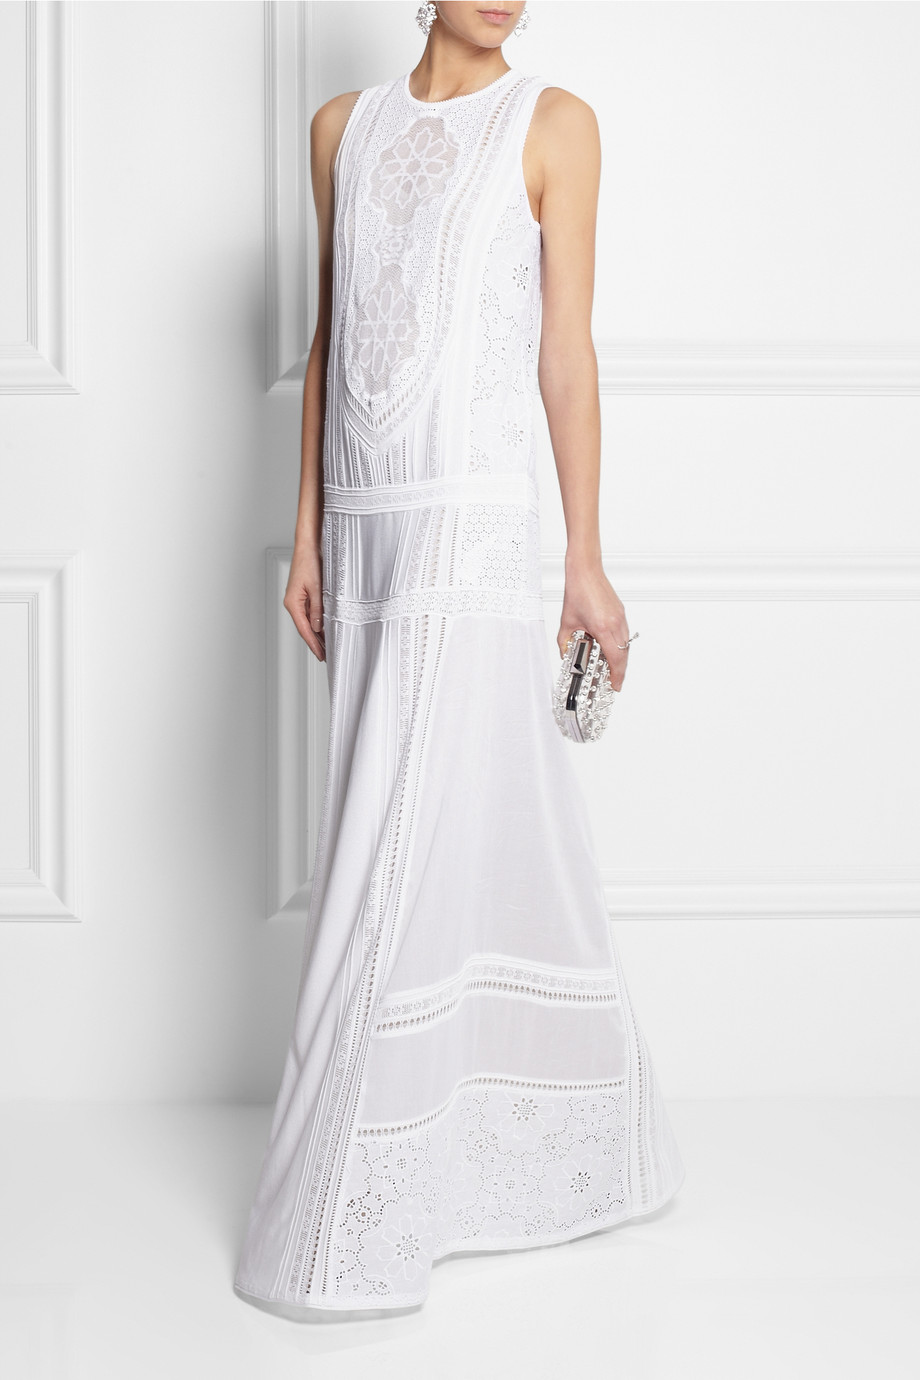 Lyst - Roberto Cavalli Cotton and Crocheted Lace Maxi Dress in White